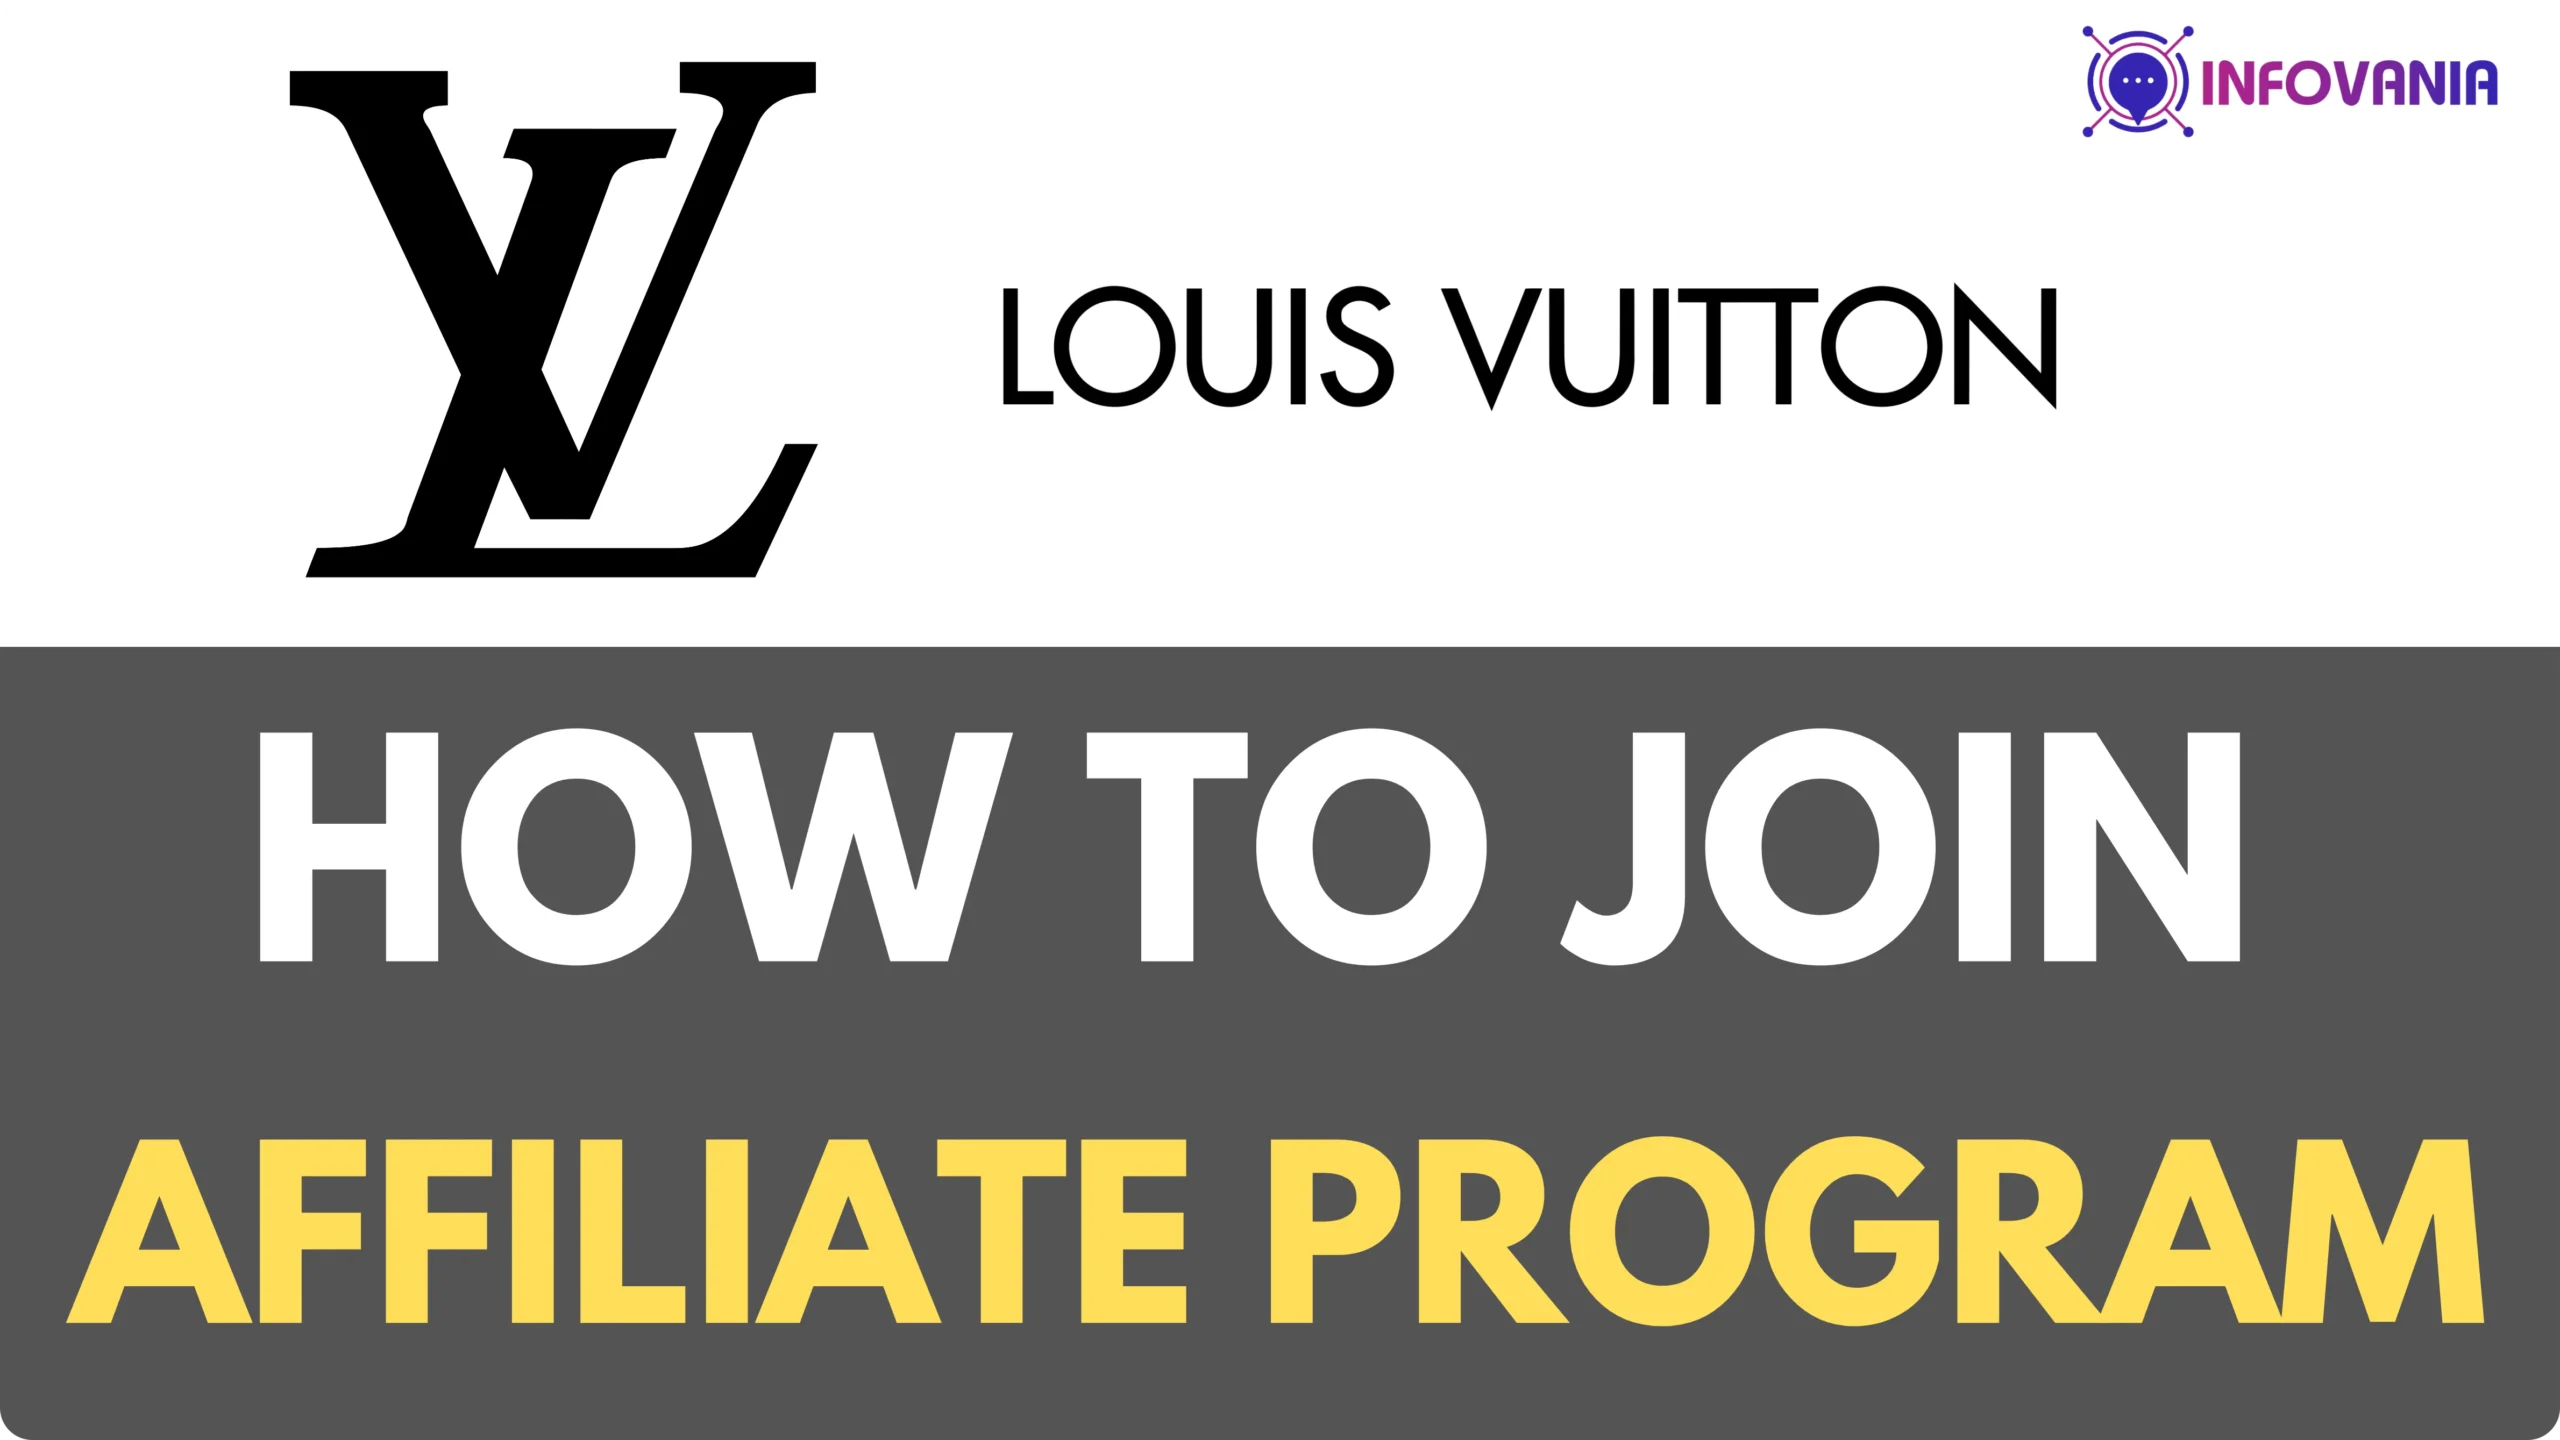 How to Join Louis Vuitton Affiliate Program